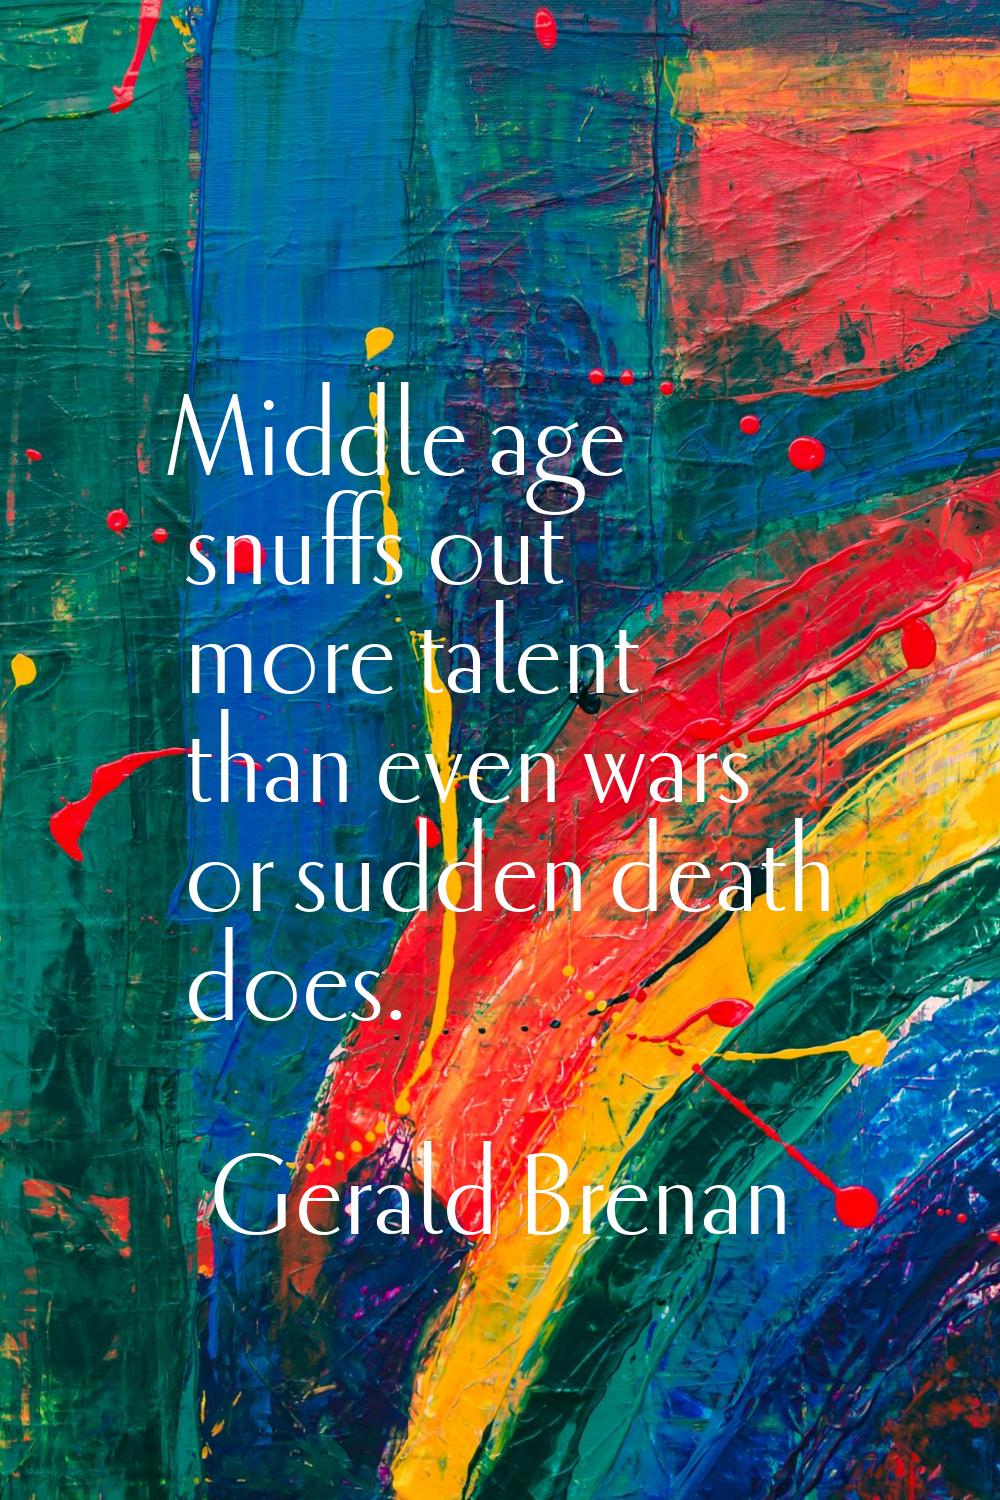 Middle age snuffs out more talent than even wars or sudden death does.